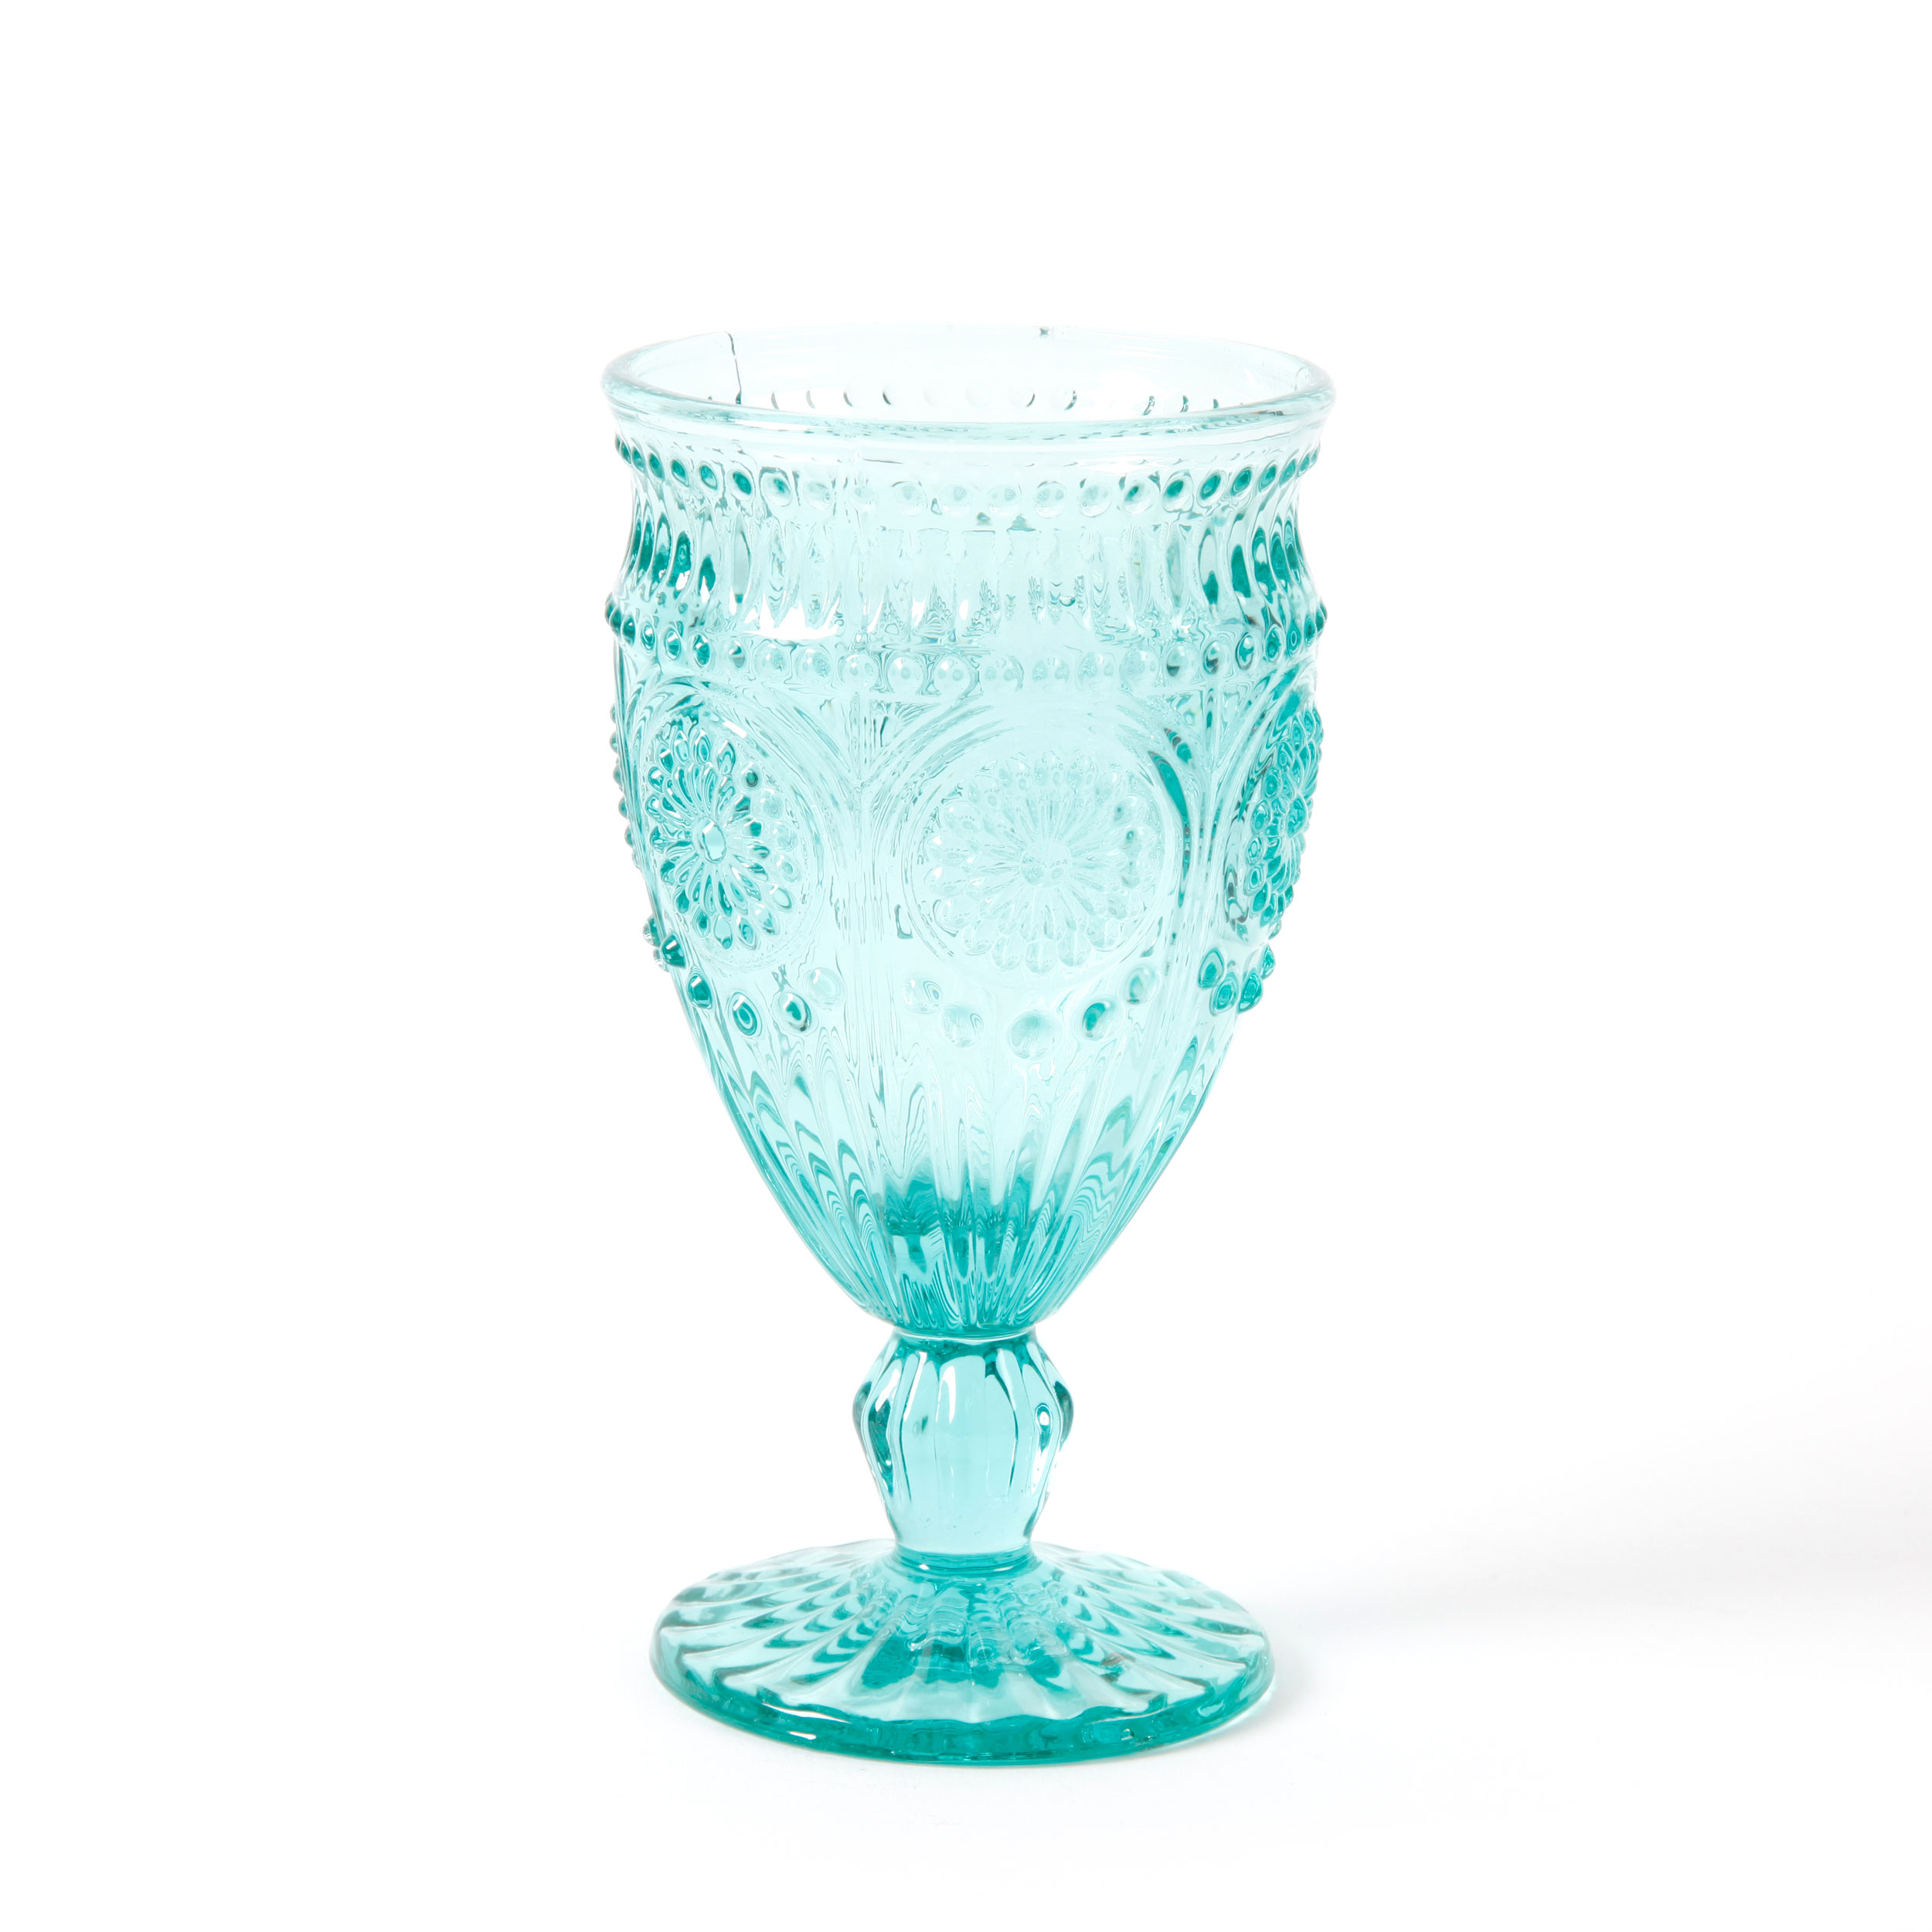 The Pioneer Woman Adeline 12-Ounce Footed Turquoise Glass Goblets, Set of 4 - image 5 of 5